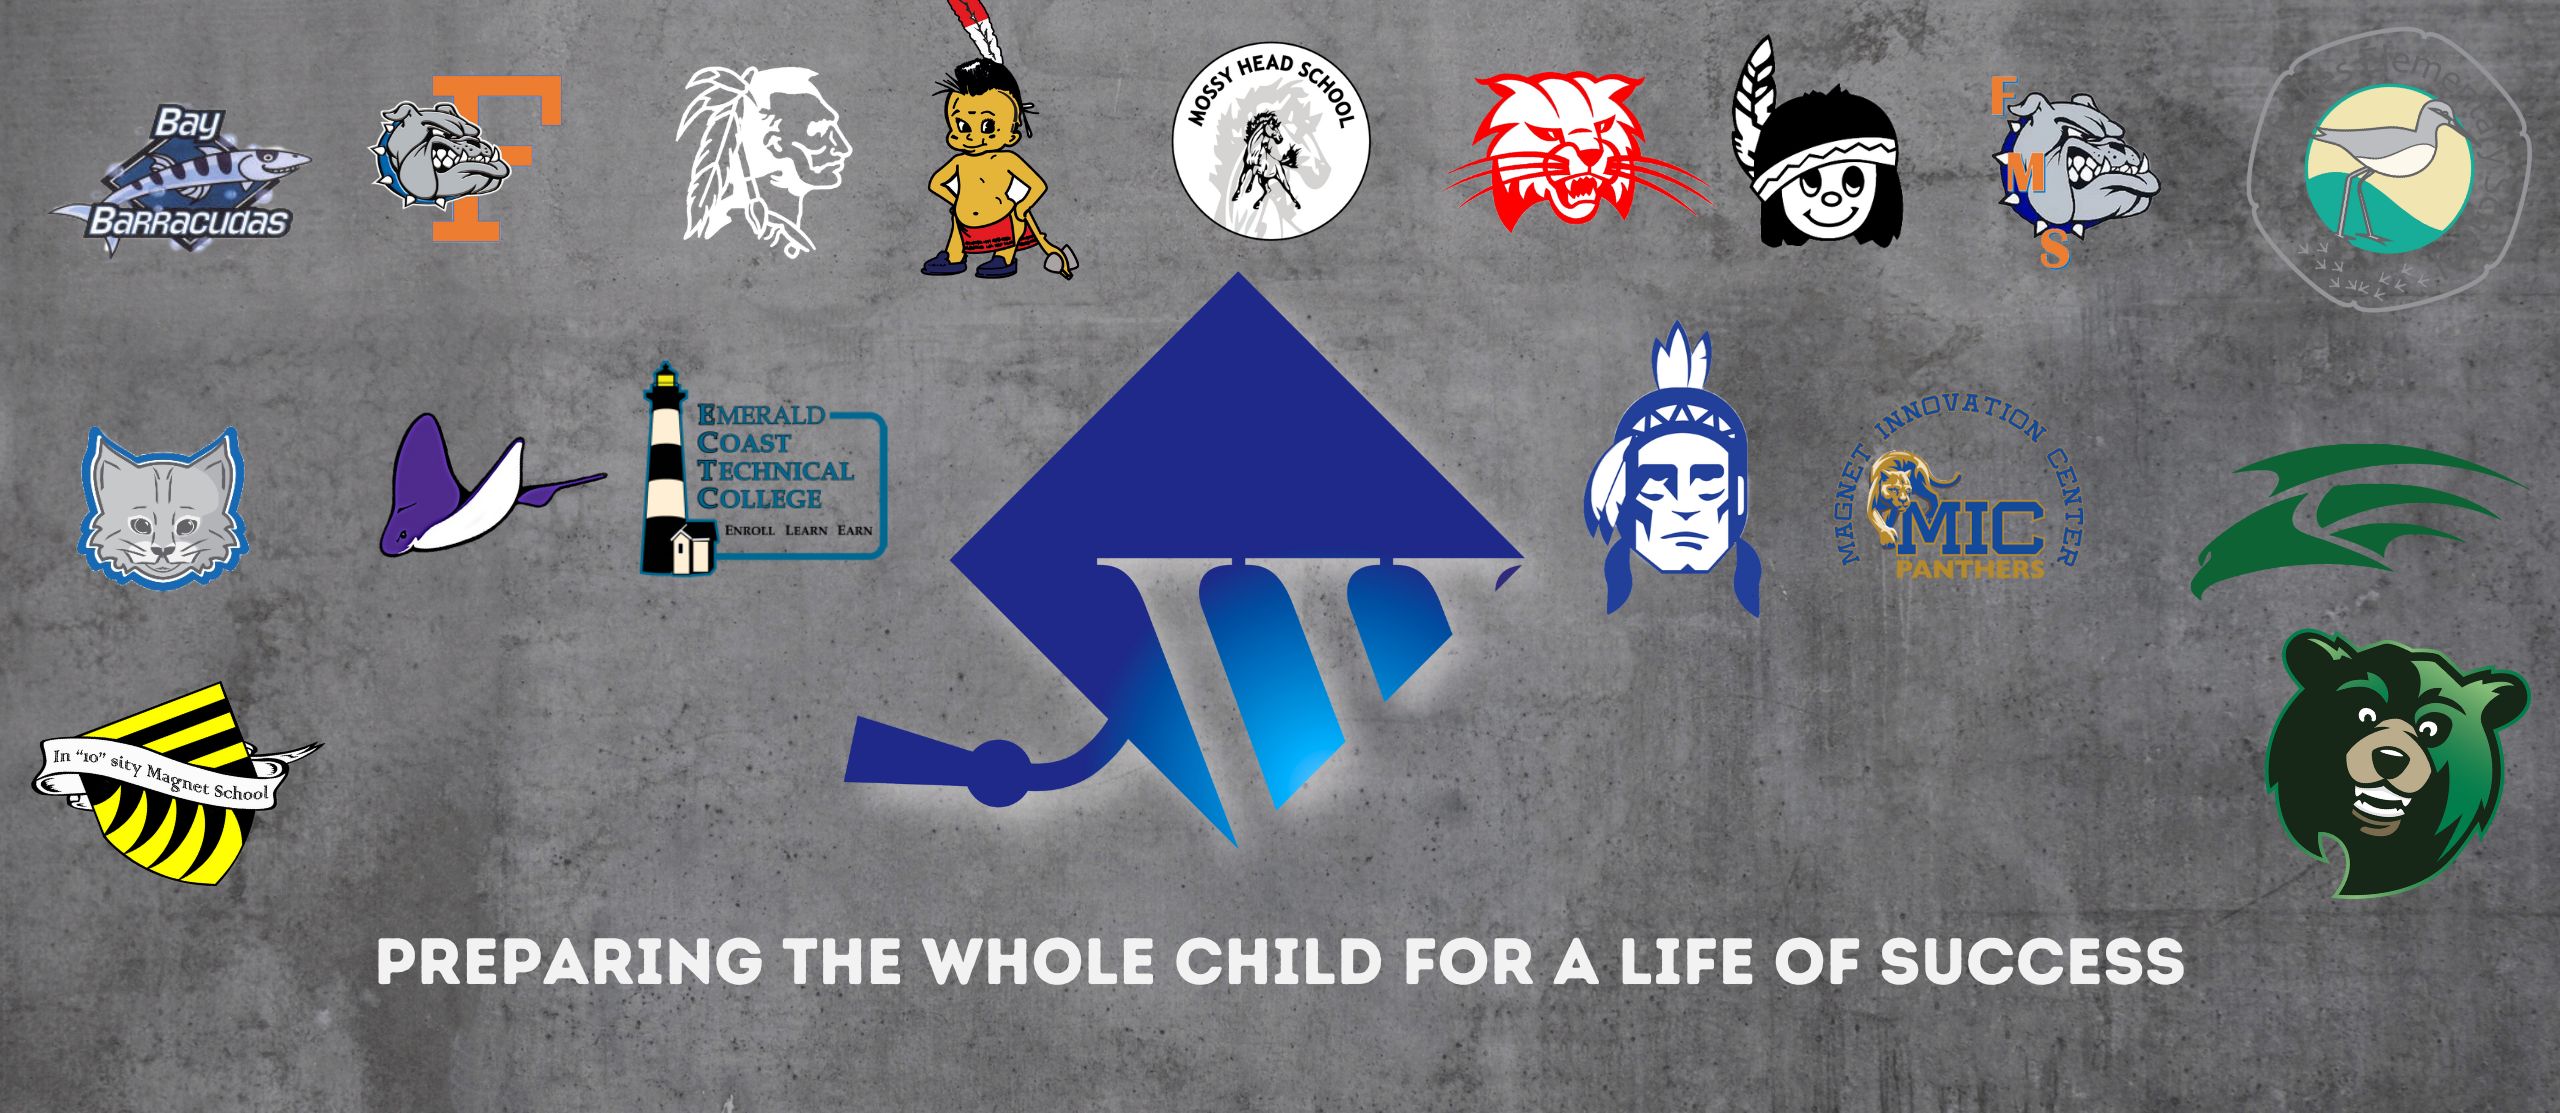 a collage of all the WCSD school mascots with the text "Preparing the whole child for a life of success"